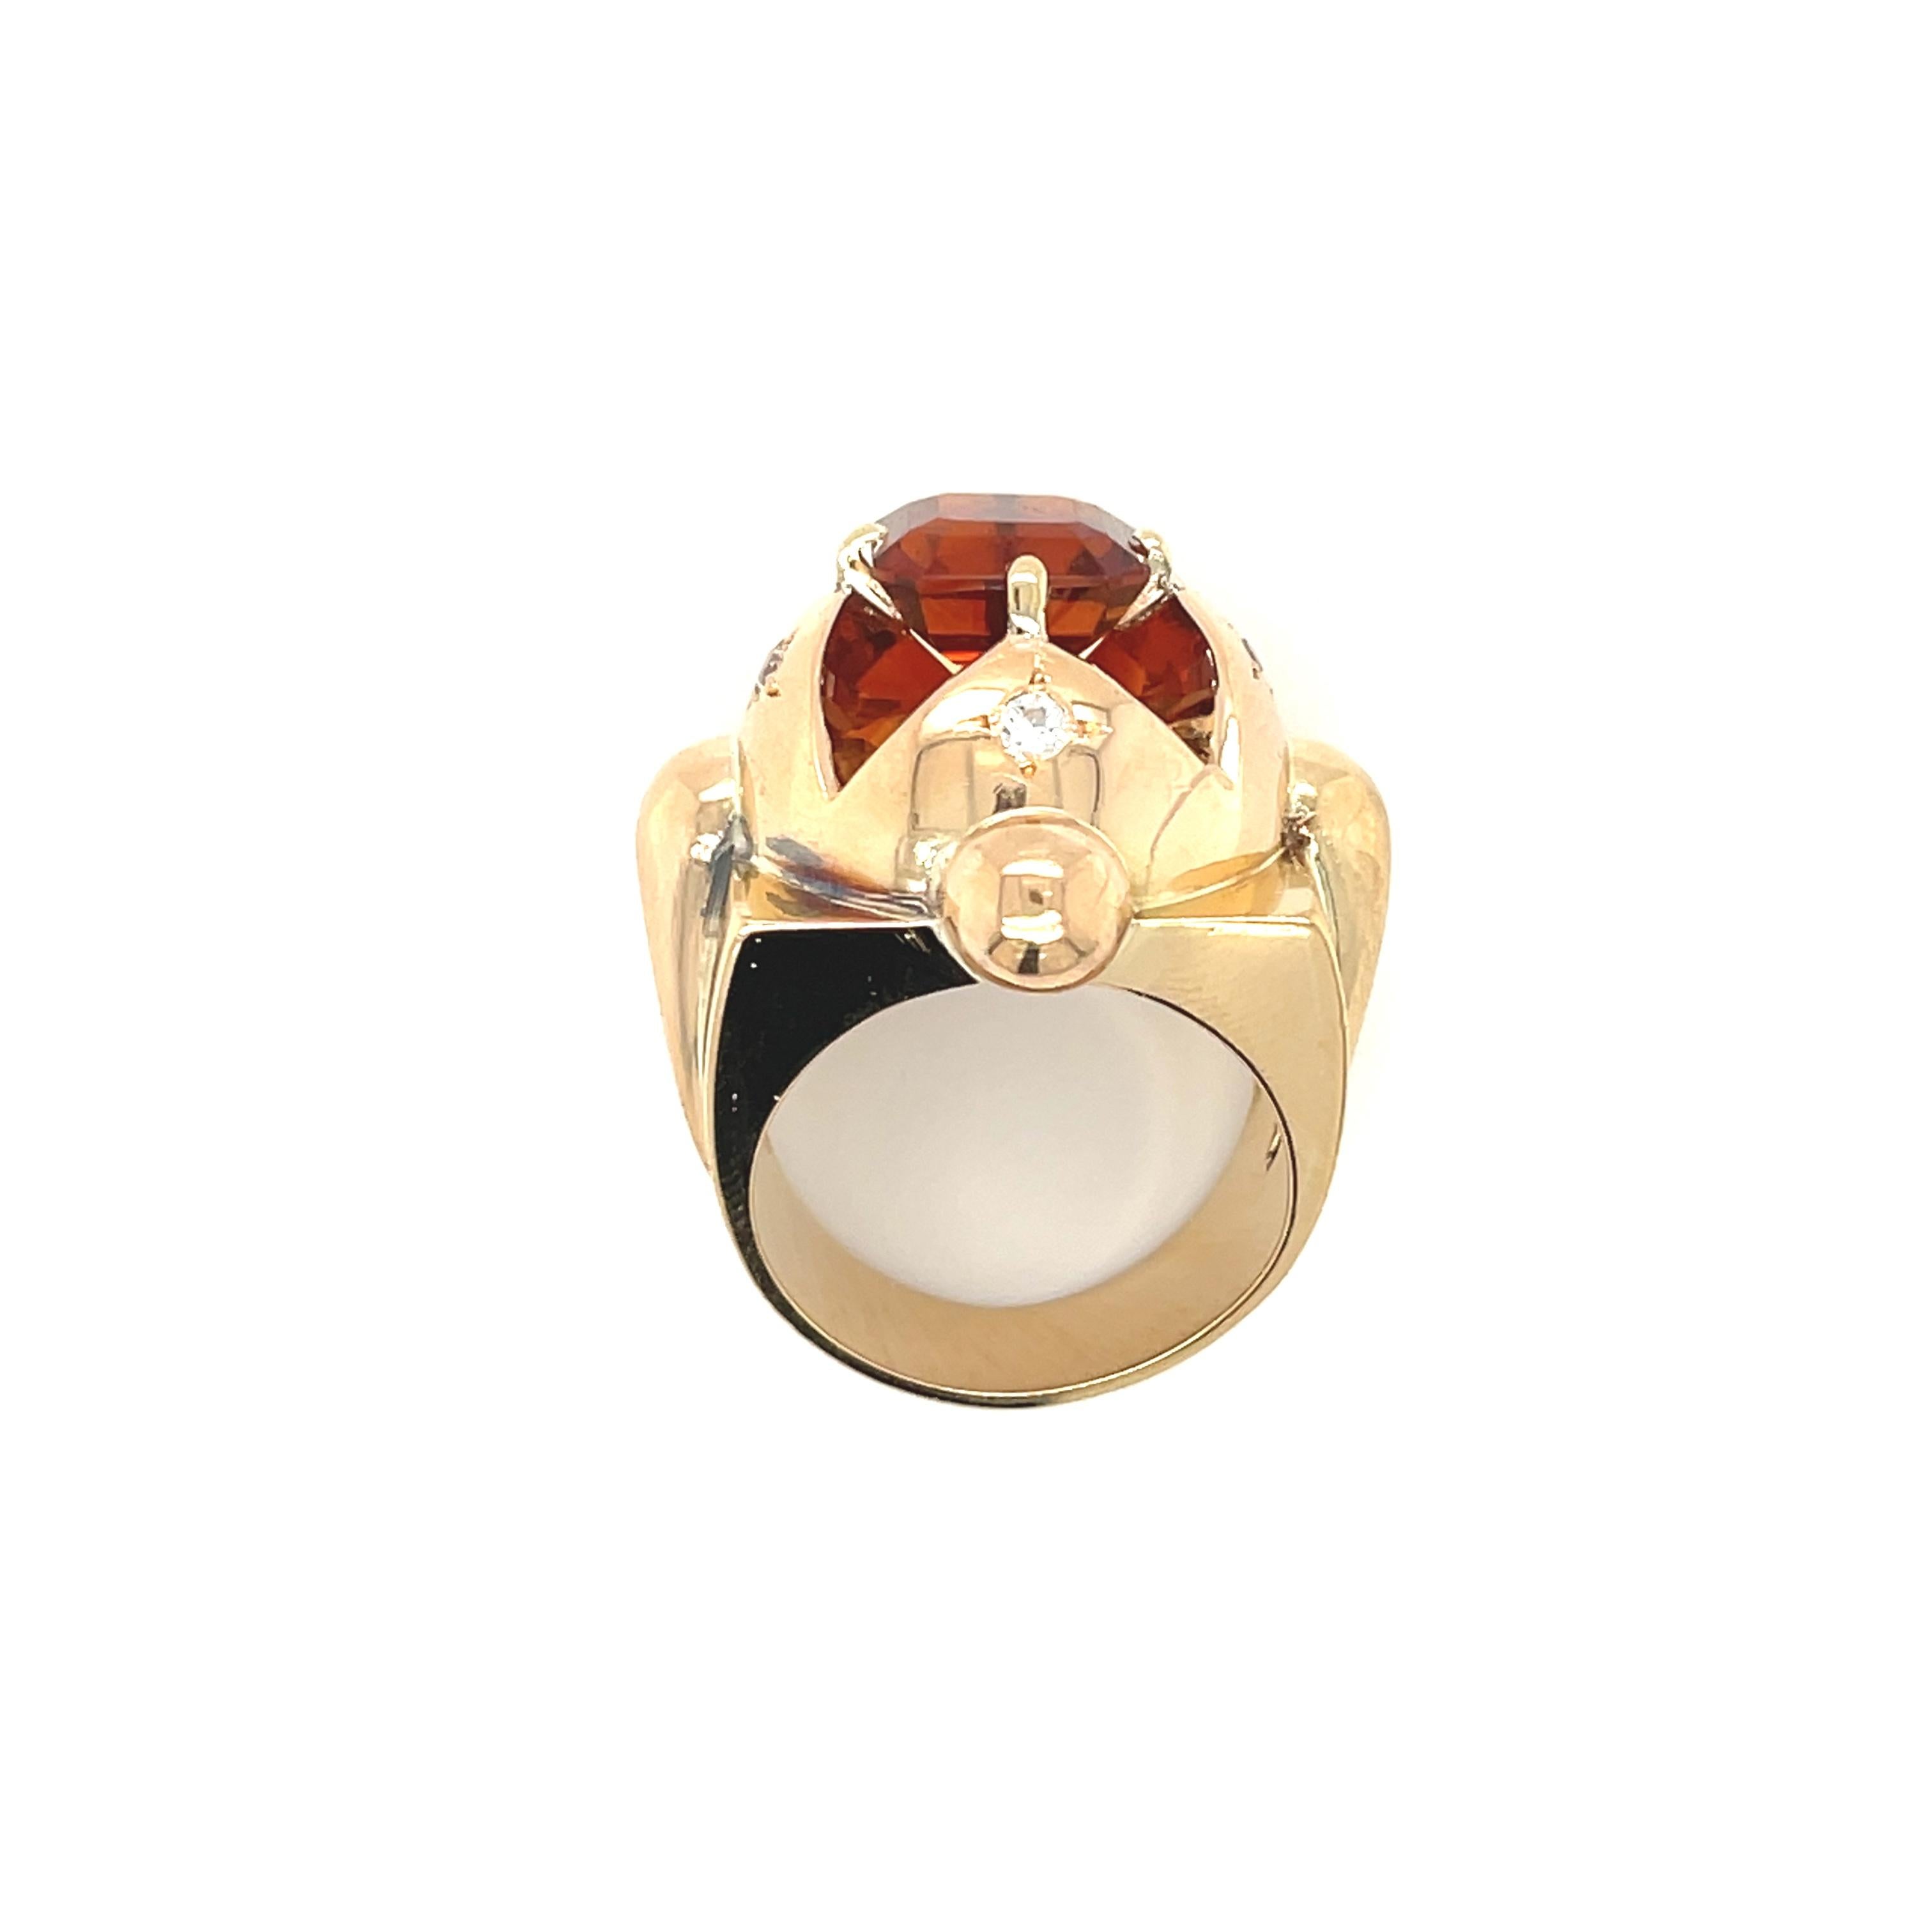 Antique Retro 18k yellow gold architectural dome ring set with diamonds and a Madeira topaz, circa 1940. This ring is a bold and dimensional ring with a unique look. The topaz seems to reflect off the bottom of the mounting. A beautiful ring to